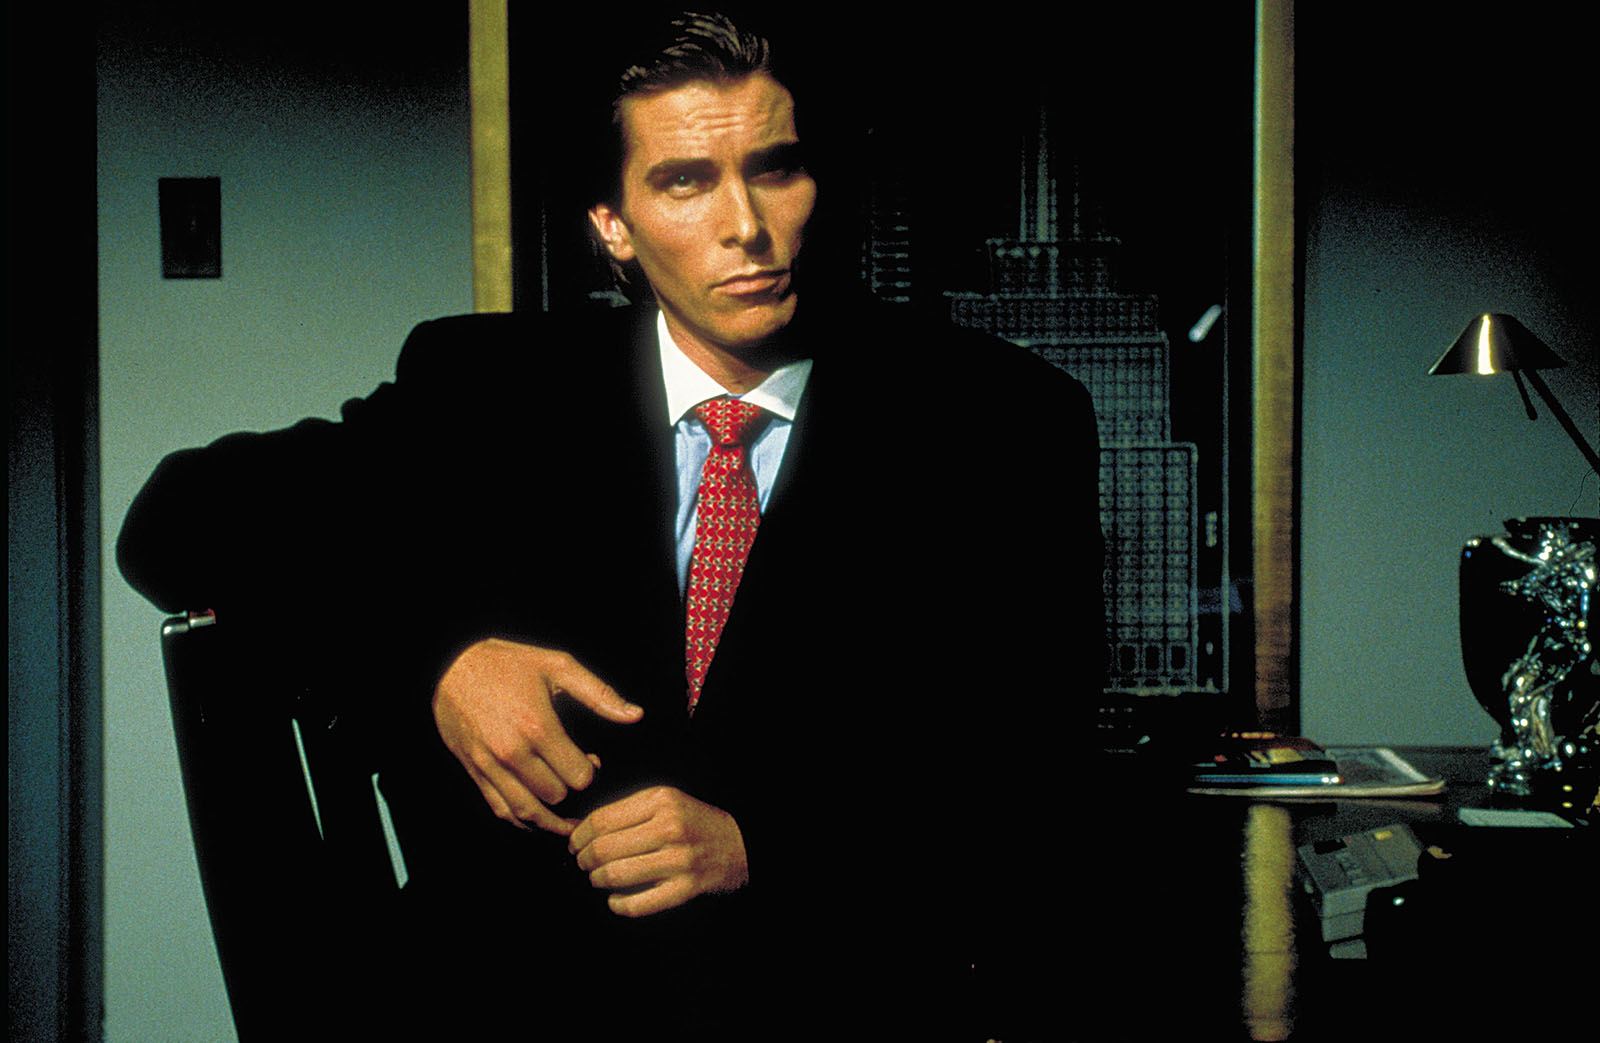 American Psycho (2000) movie review